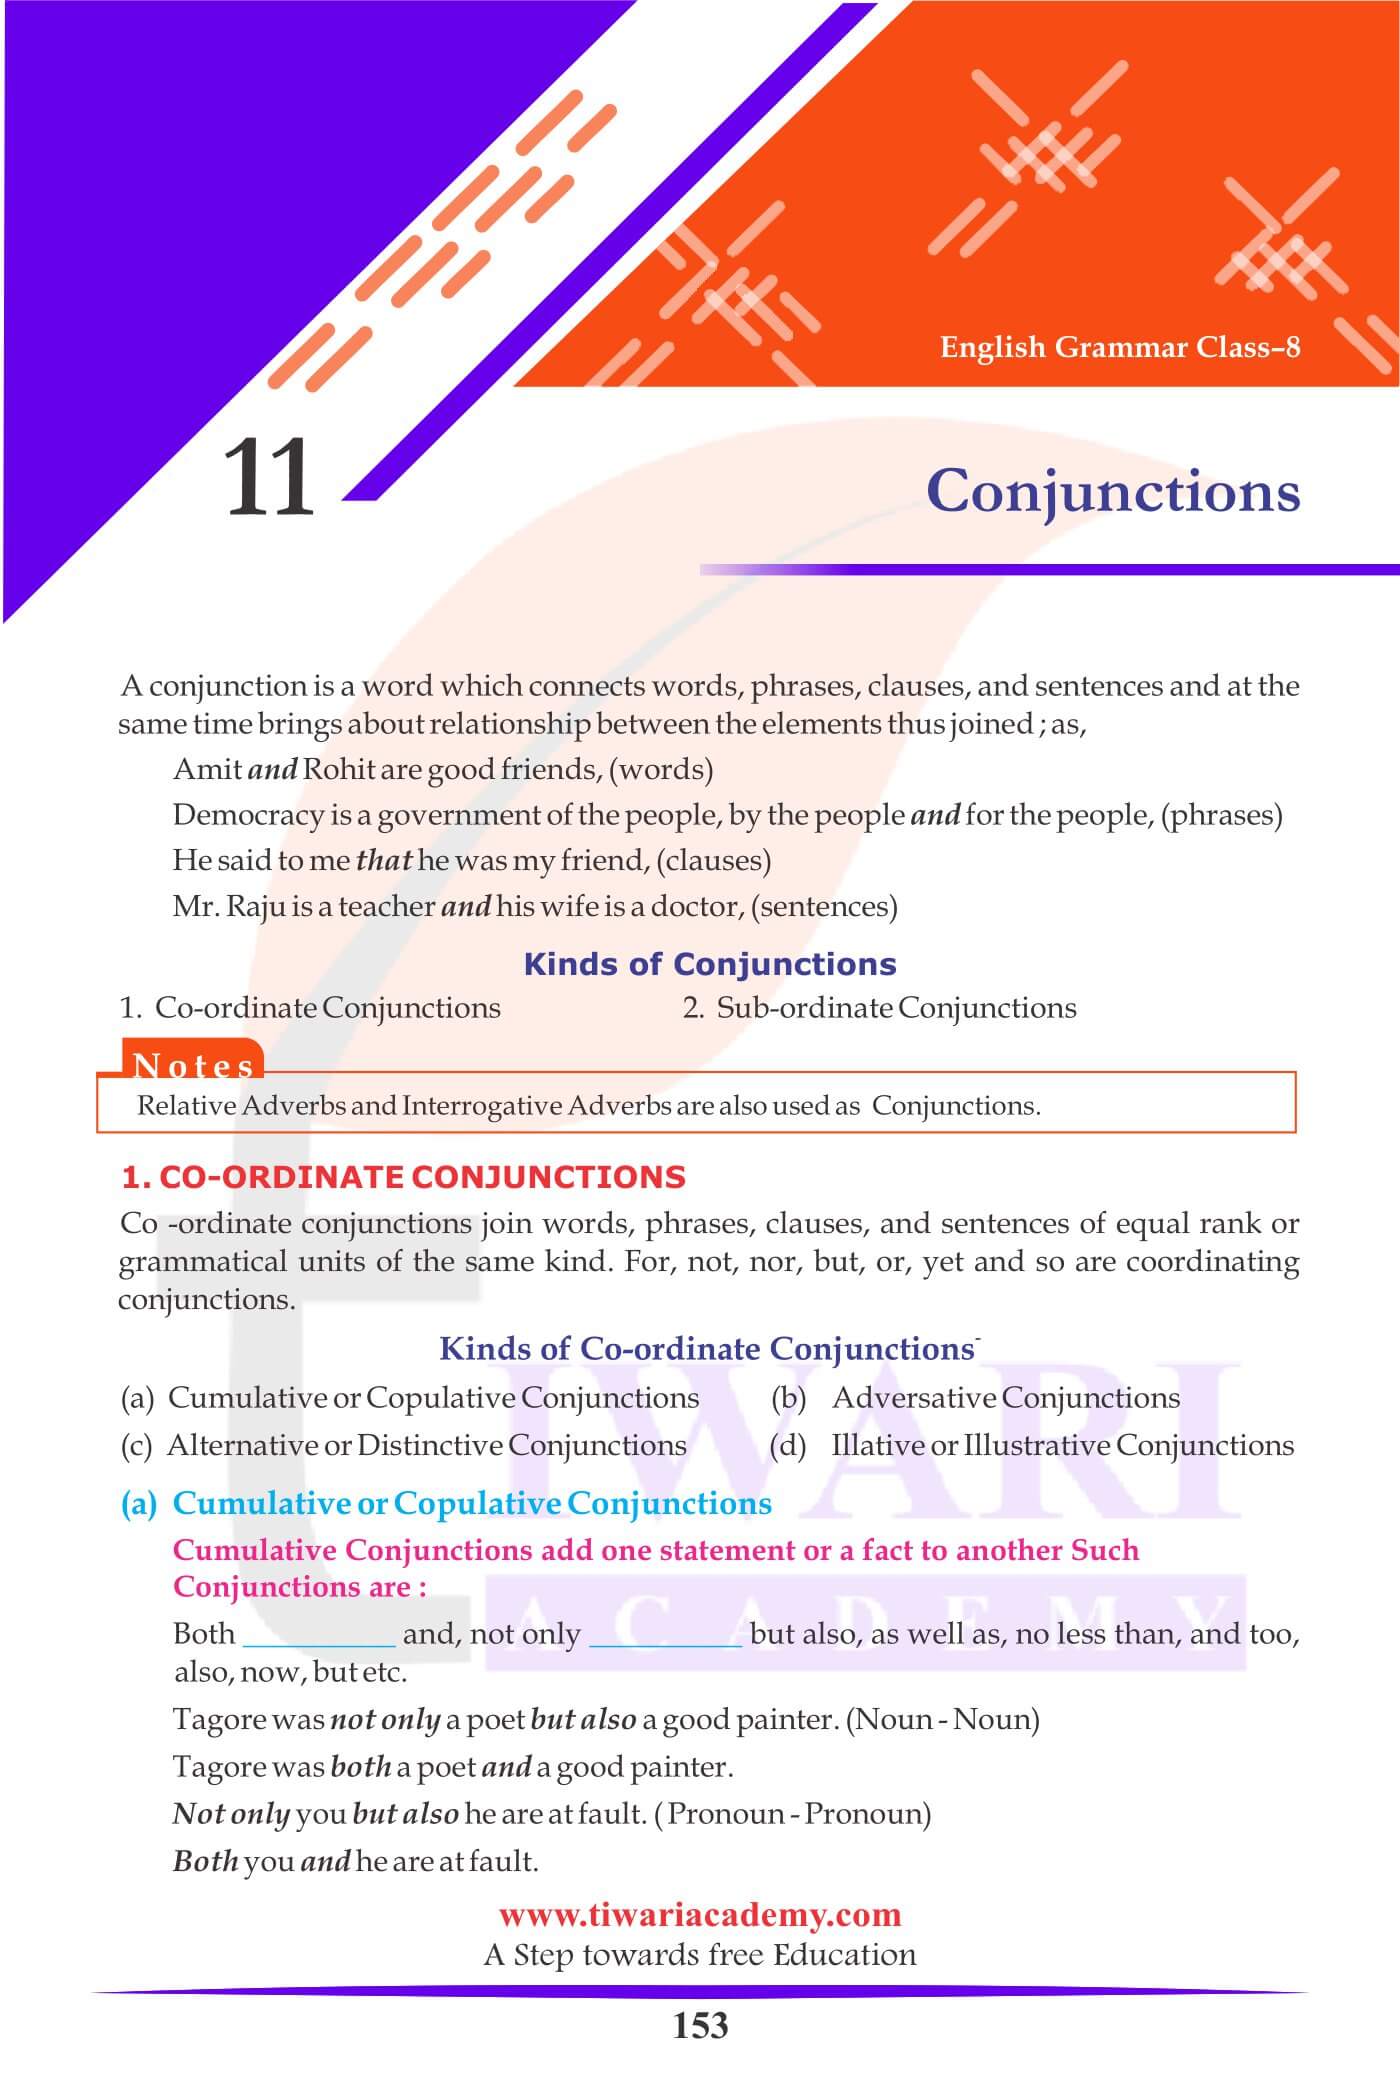 Class 8 English Grammar Chapter 11 Conjunctions